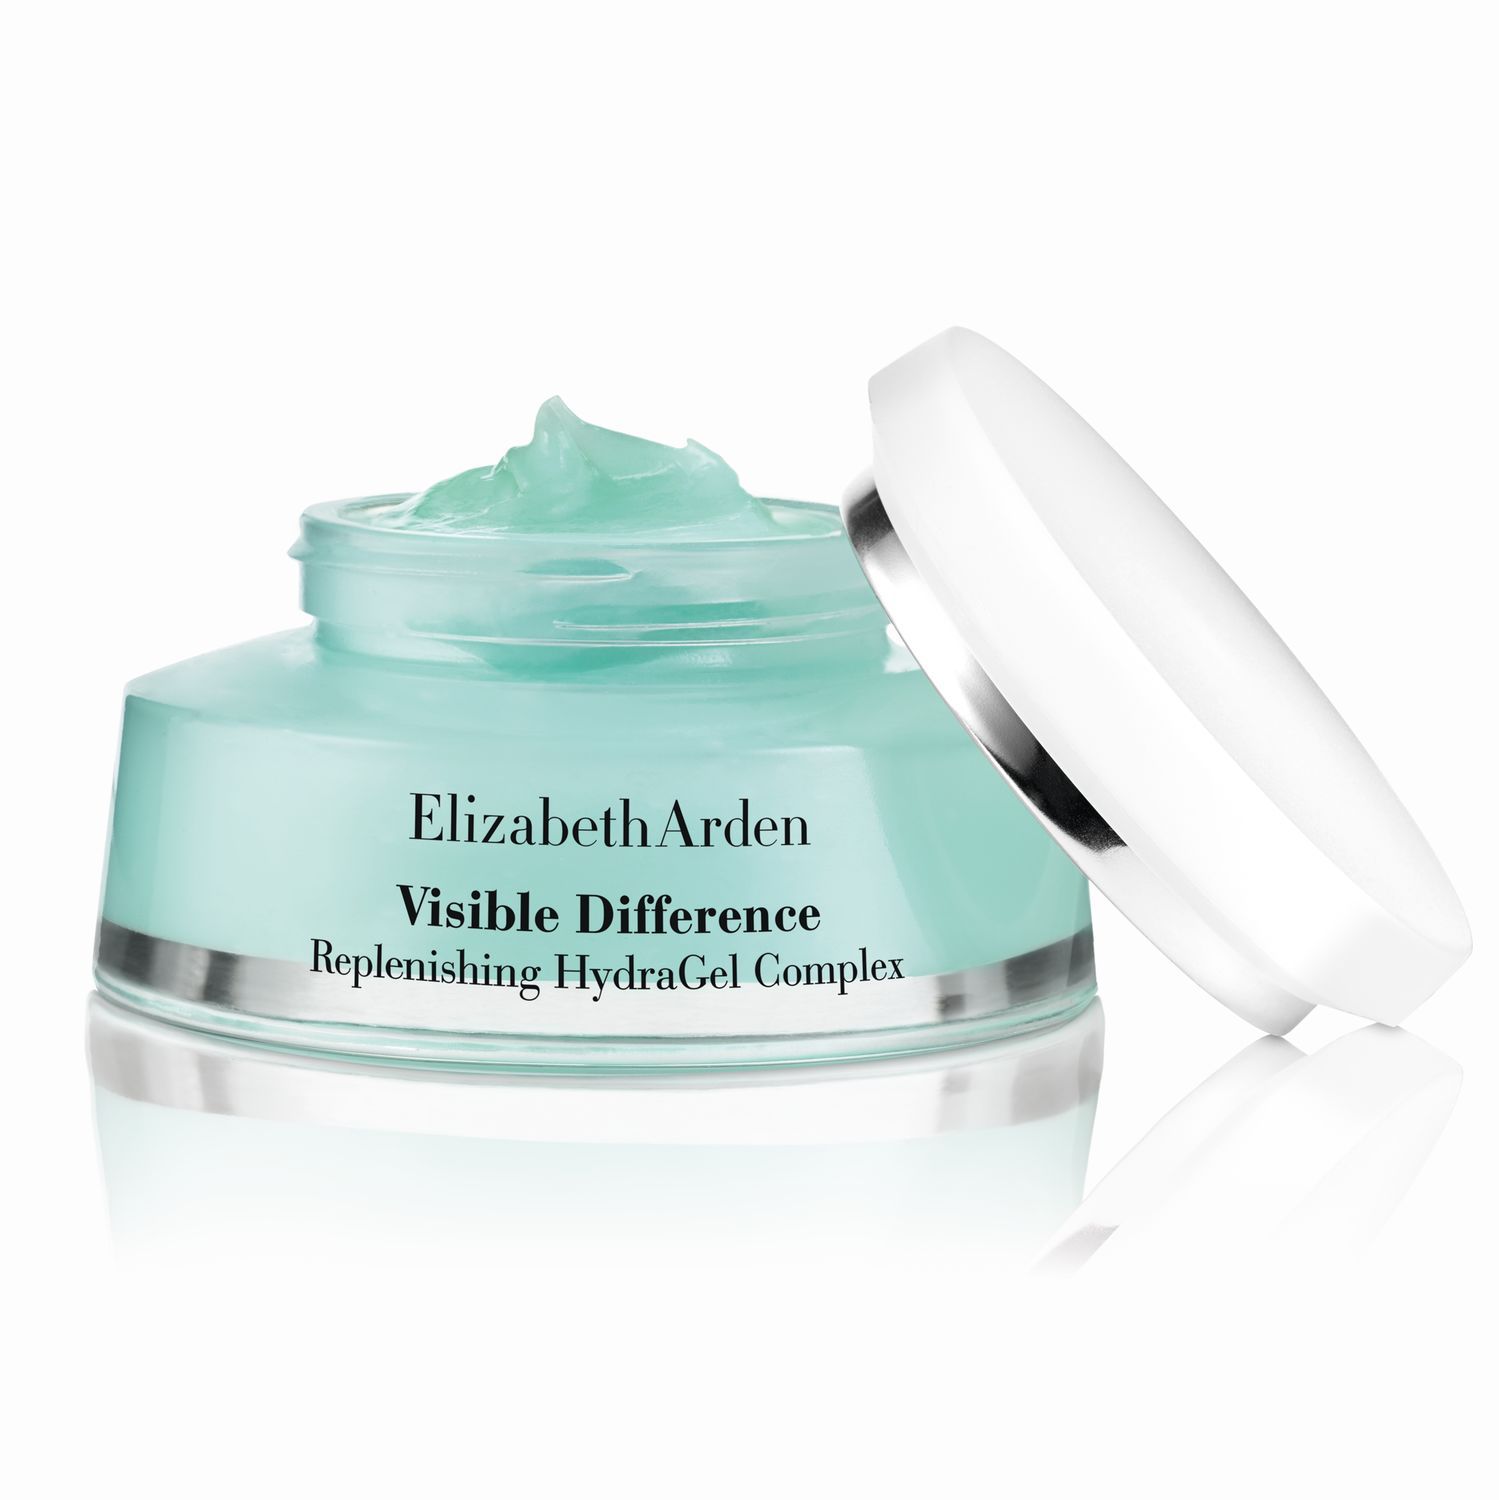 Elizabeth Arden Visible Difference Replenishing Hydragel Complex